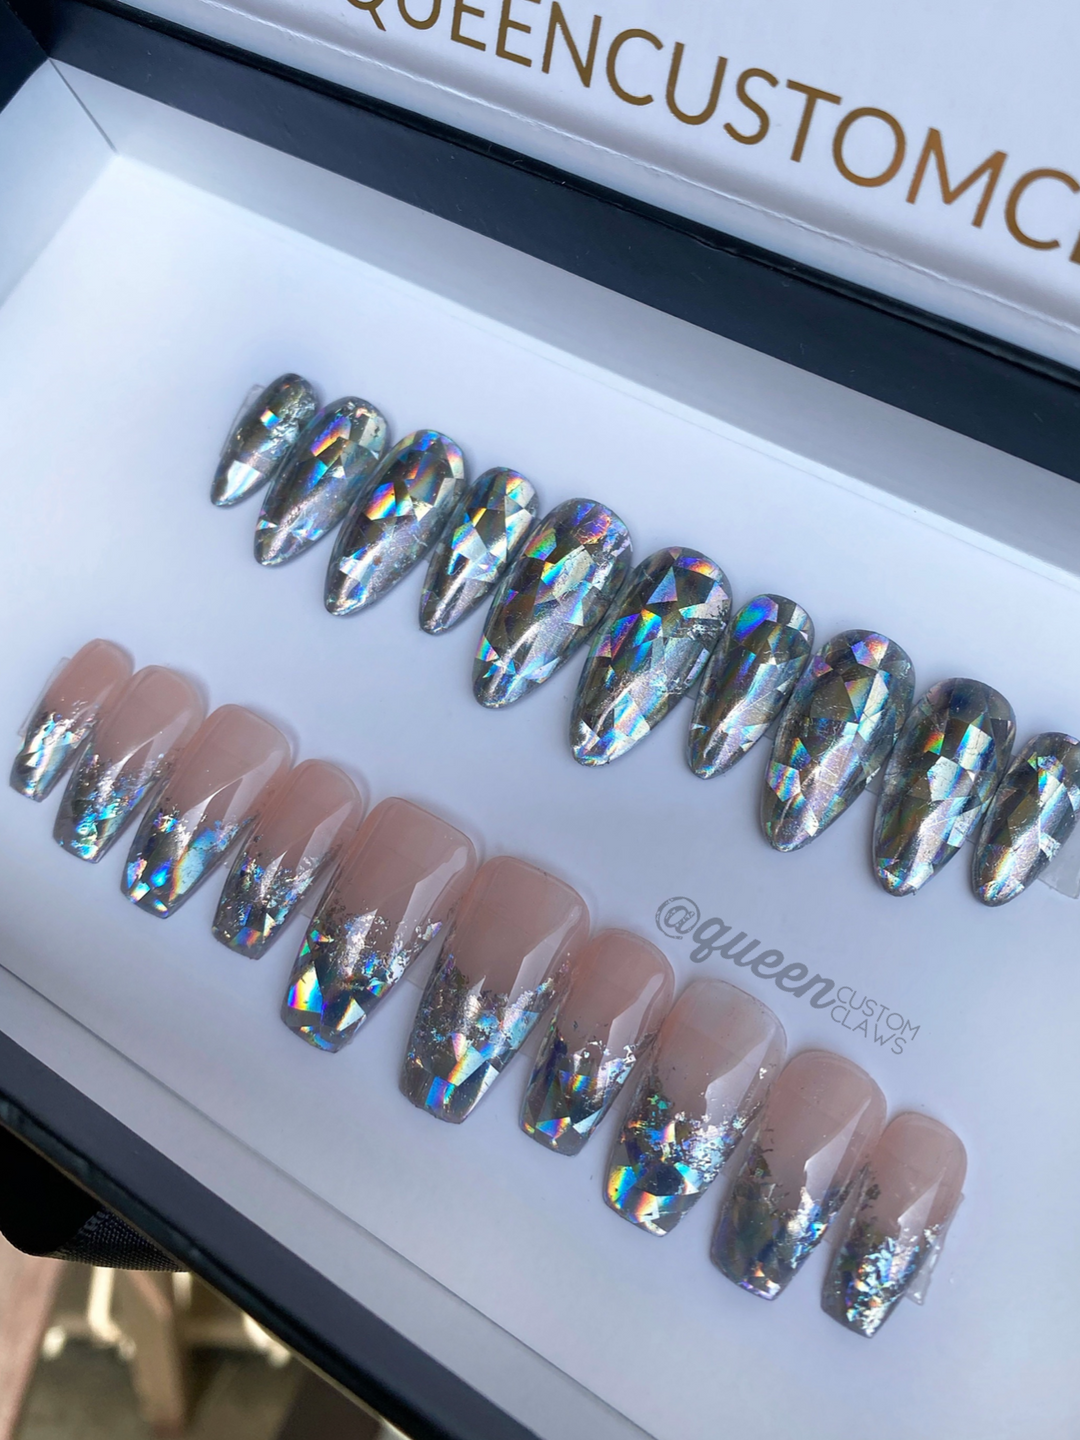 HoloTop Holographic press on jelly nails